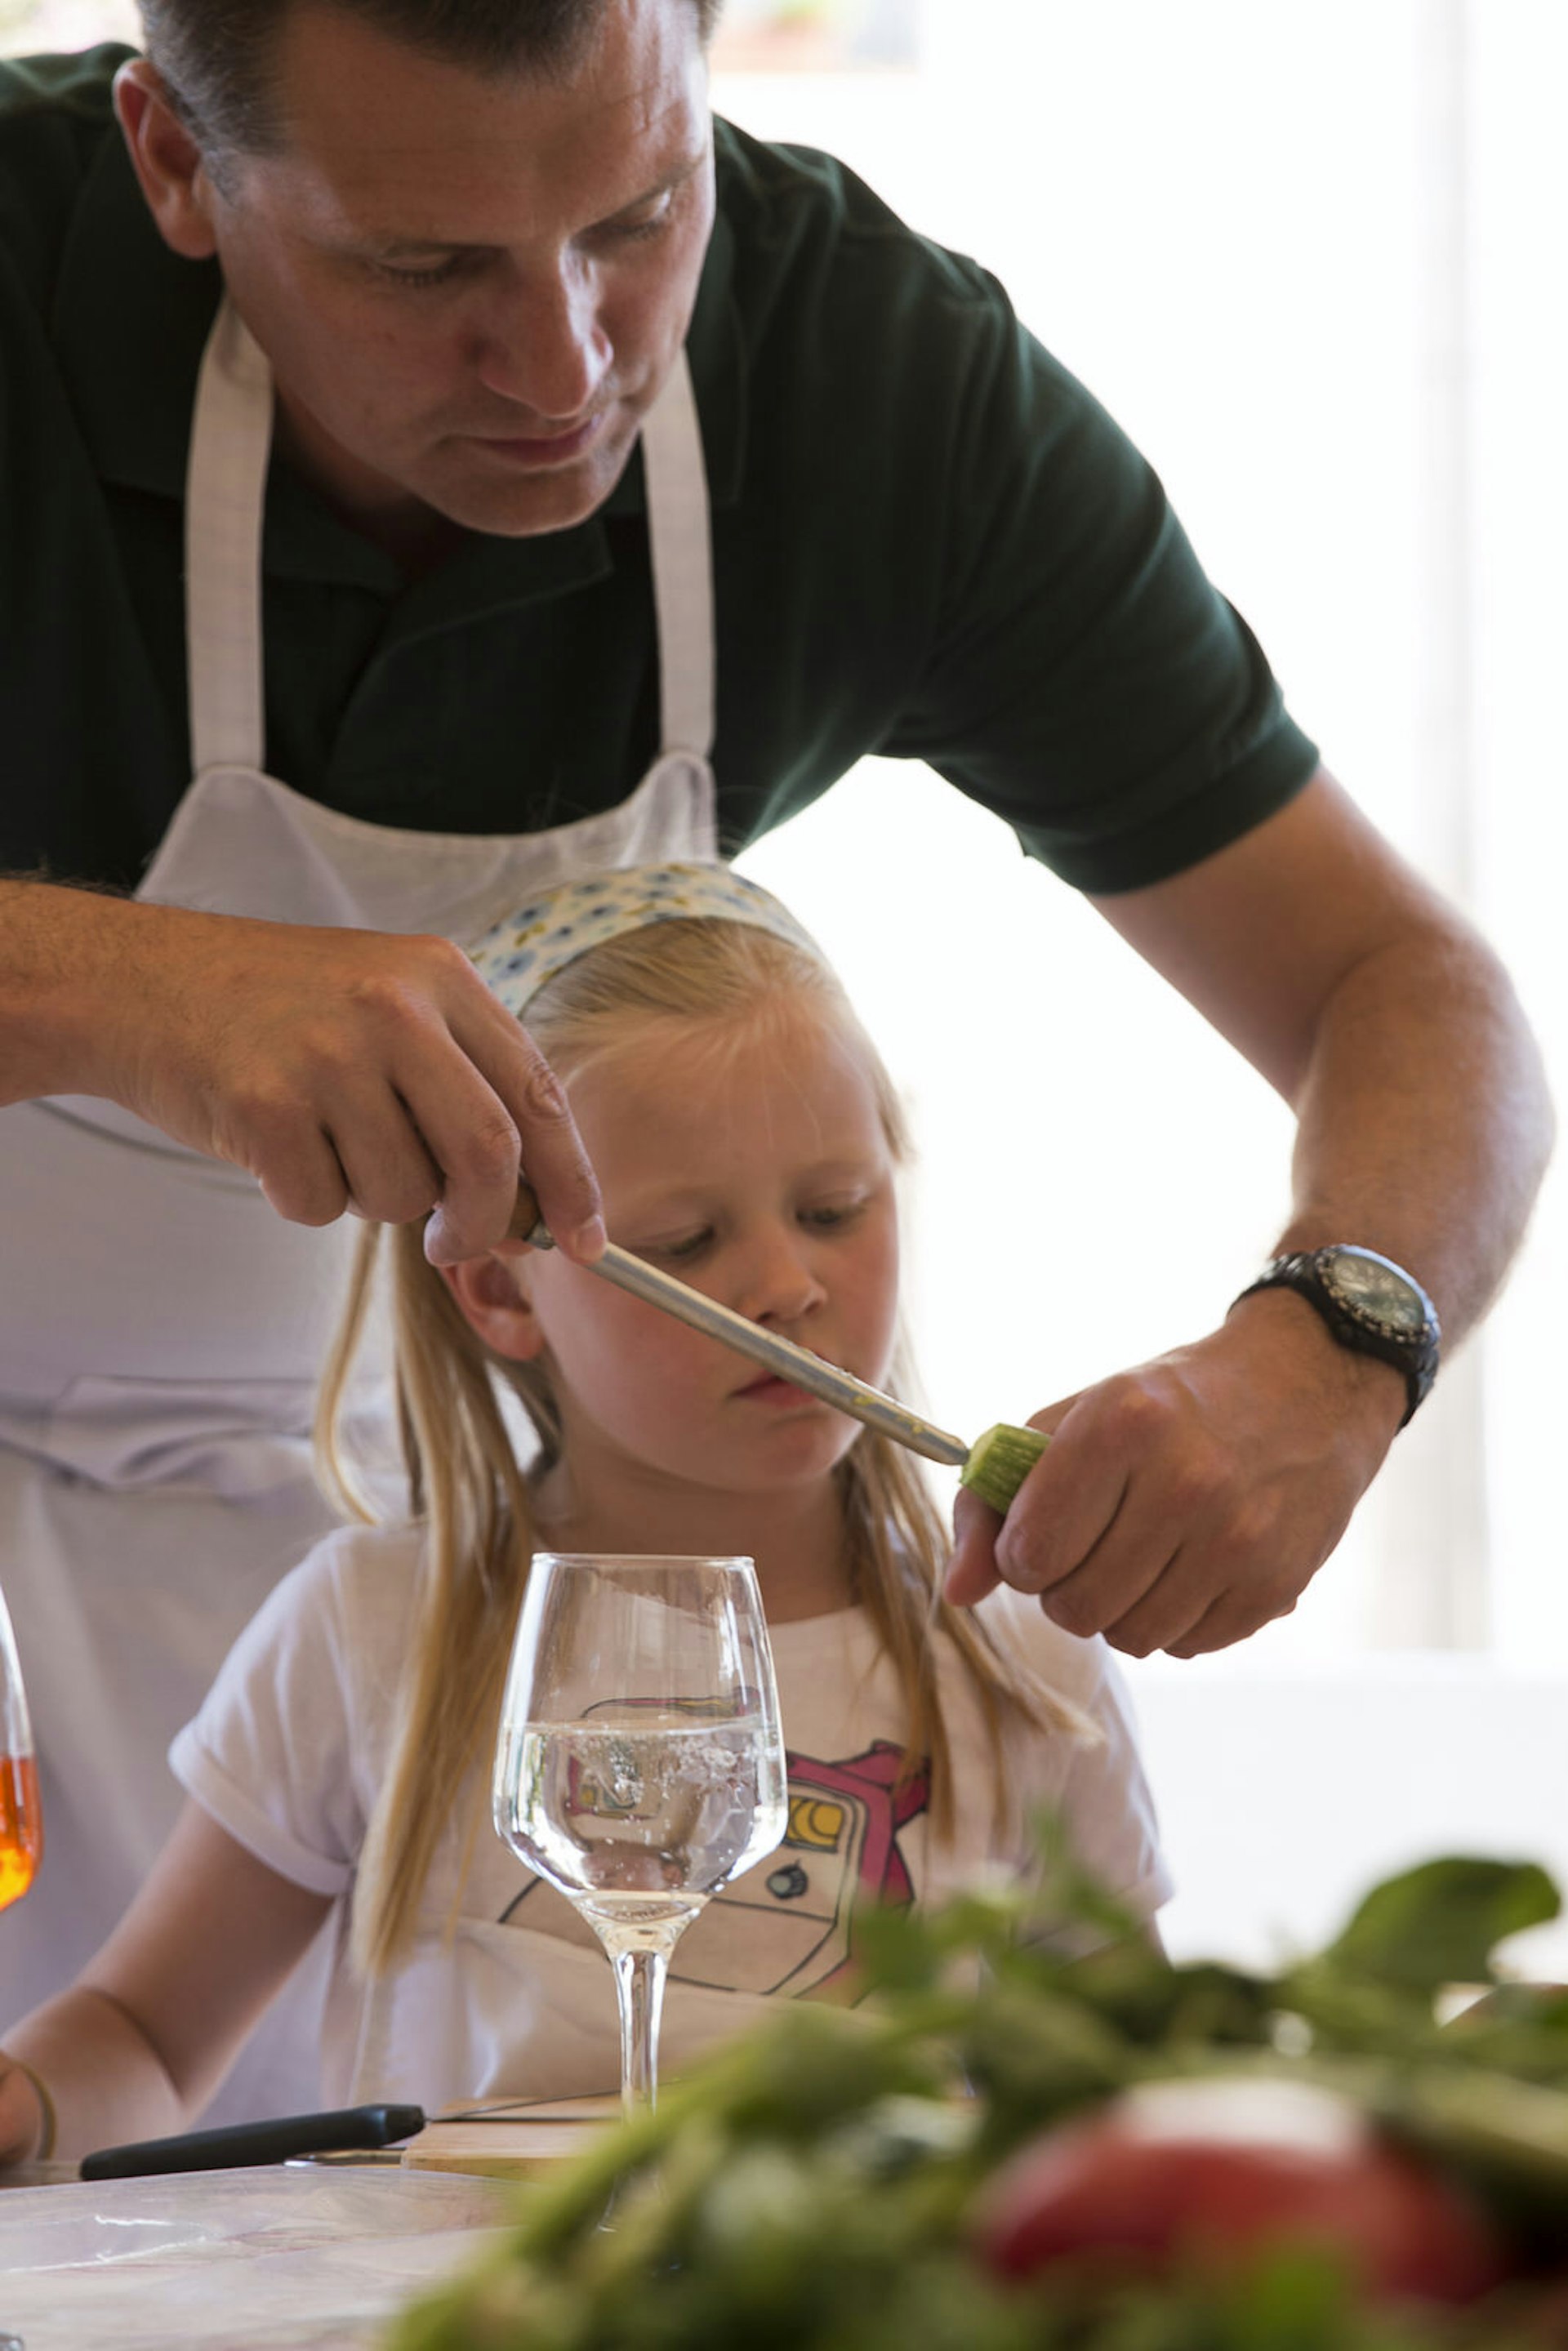 A man in an apron shows a young blonde girl a cooking technique © Beit Sitti